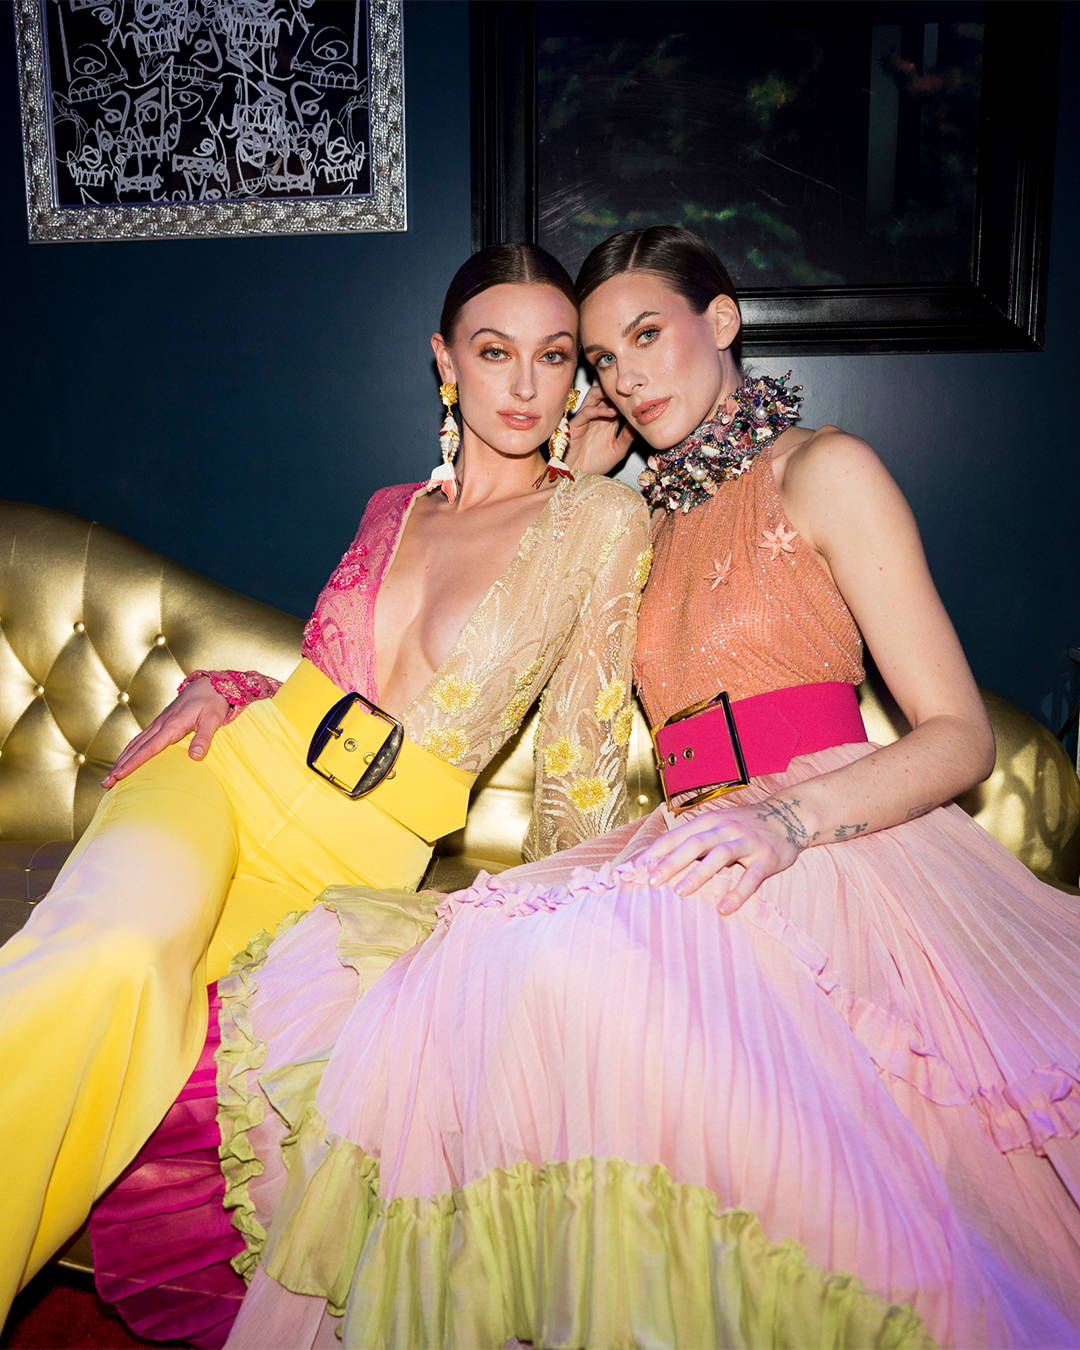 Image of 2 models posing in colorful eccentric outfits